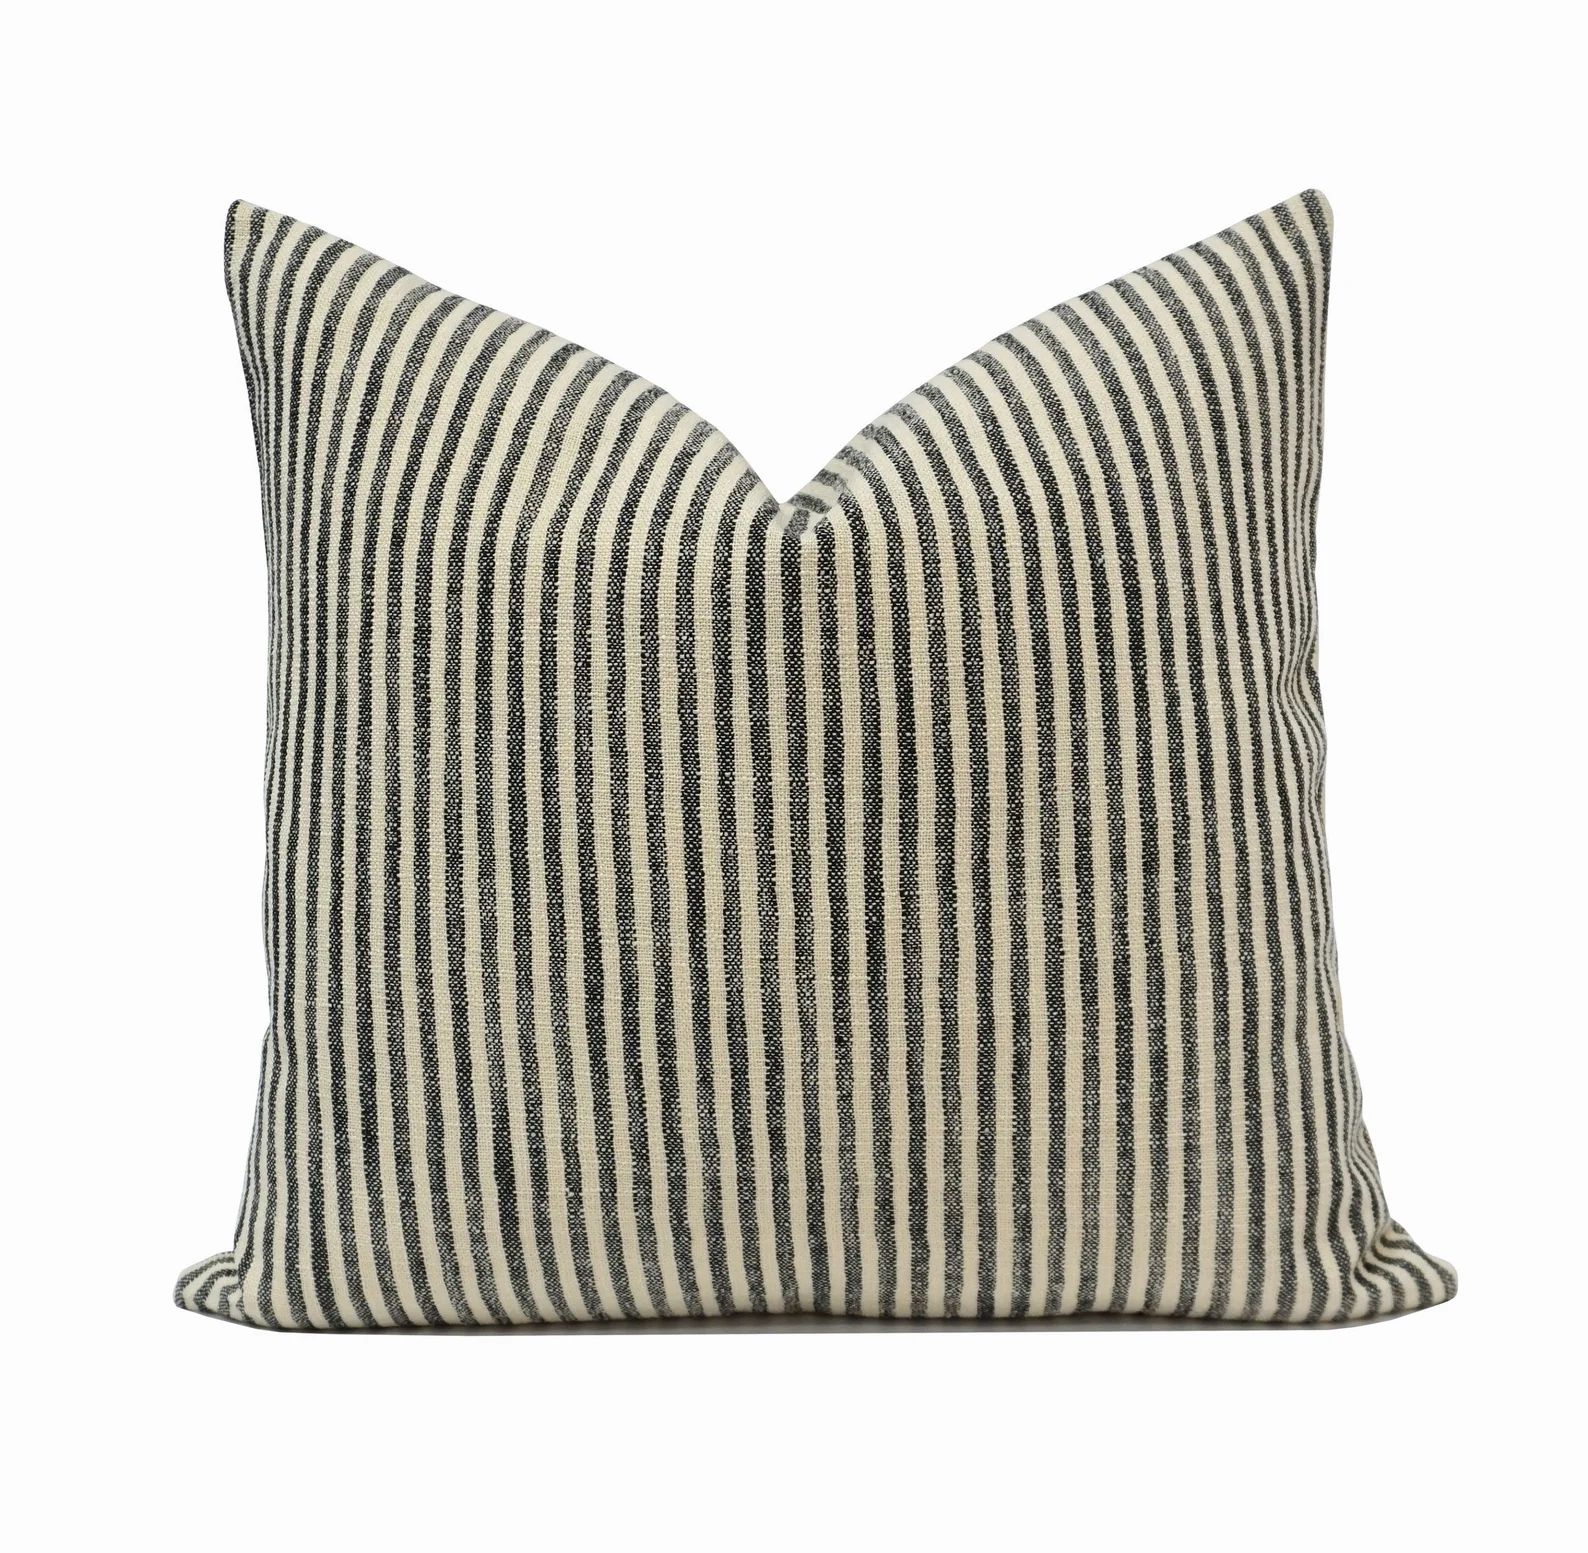 Venice Black/natural Striped Linen Look Throw Pillow Cover. - Etsy | Etsy (US)